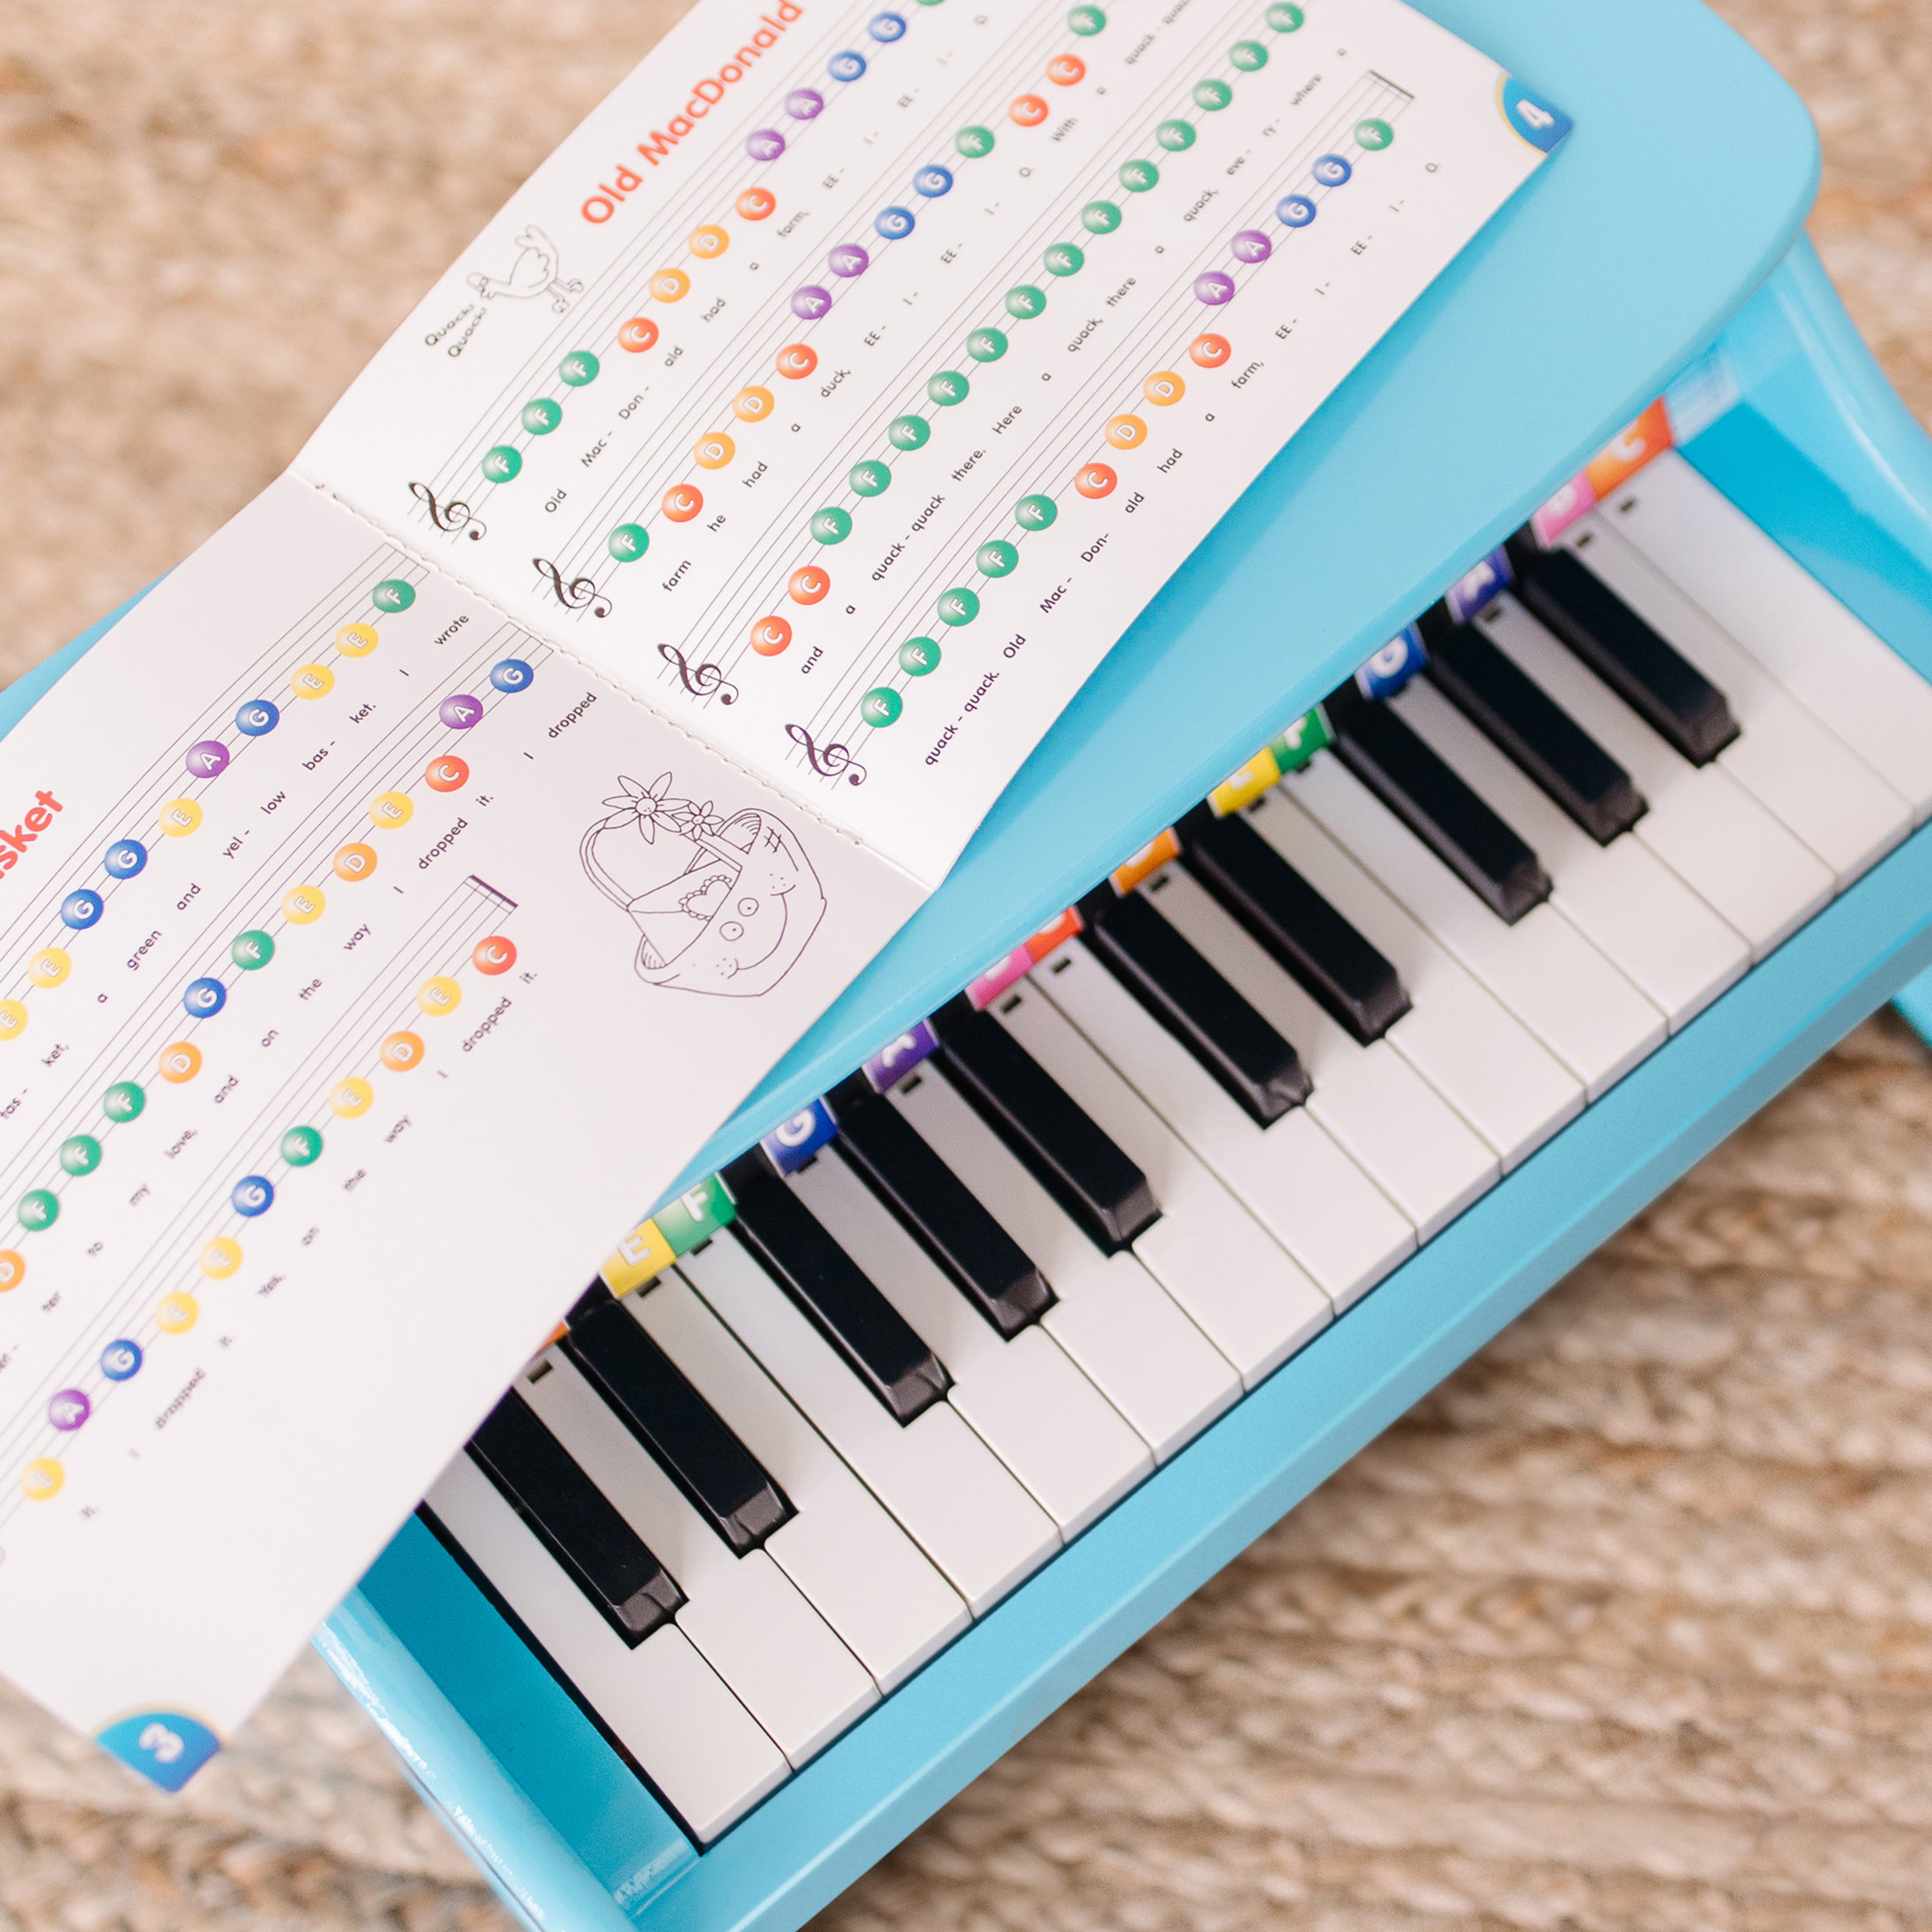 Melissa & Doug Learn-to-Play Piano With 25 Keys and Color-Coded Songbook - Blue - image 4 of 9